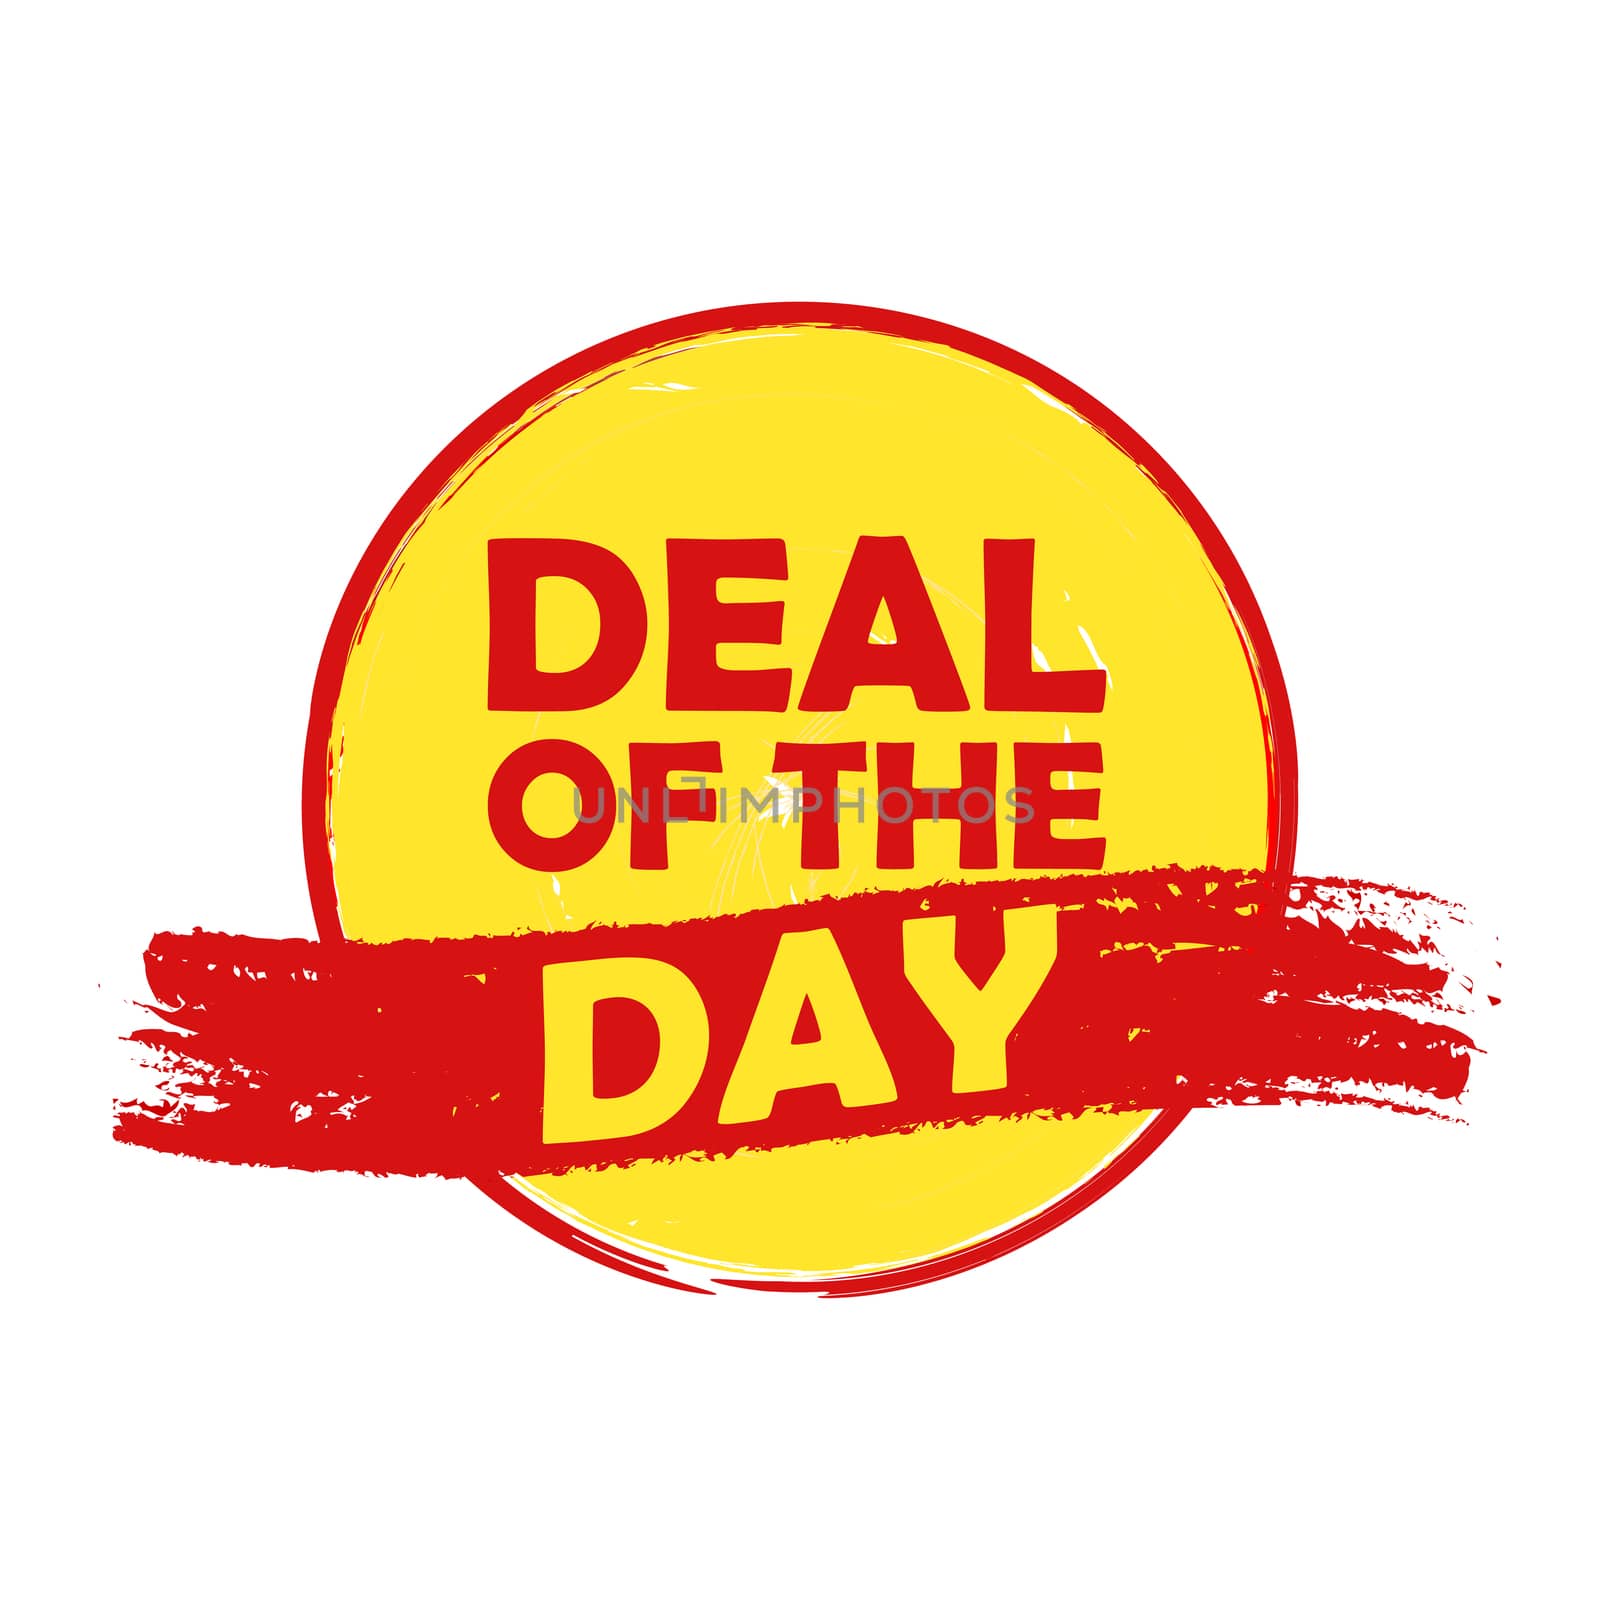 deal of the day, yellow and orange round drawn label by marinini